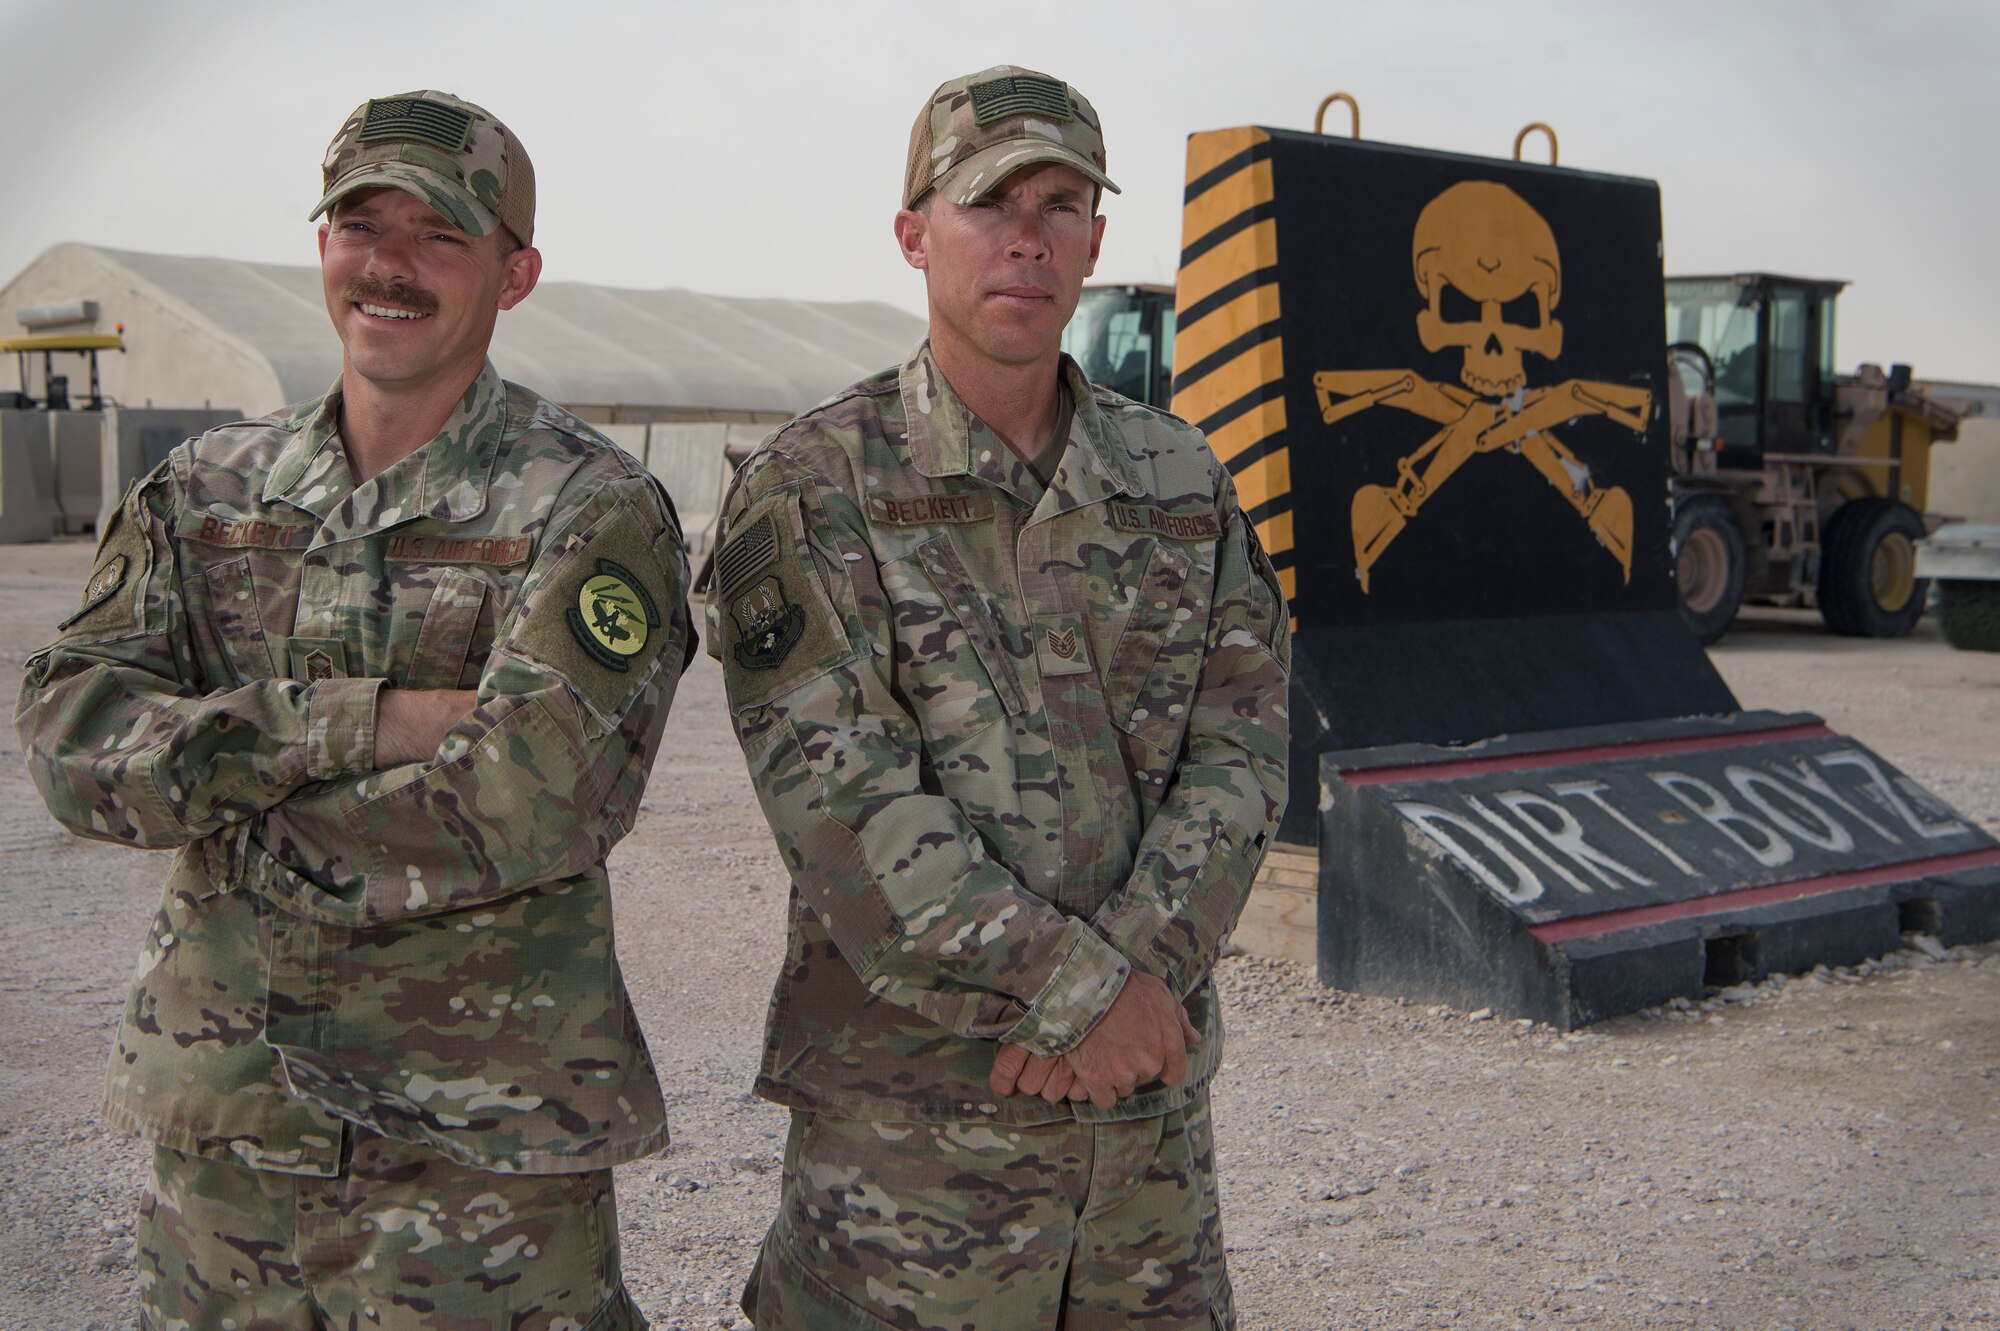 Master Sgt. Christopher Beckett, left, 379th Expeditionary Civil Engineer Squadron (ECES) heavy equipment section chief, and Tech. Sgt. John Beckett, 379th ECES heavy equipment project lead, stand together in front of the 379th ECES “Dirt Boyz” barrier March 27, 2019, at Al Udeid Air Base, Qatar. The brothers, who have served in the Arizona Air National Guard since 2003, are currently deployed together to the same ECES unit at Al Udeid Air Base. (U.S. Air Force photo by Tech. Sgt. Christopher Hubenthal)